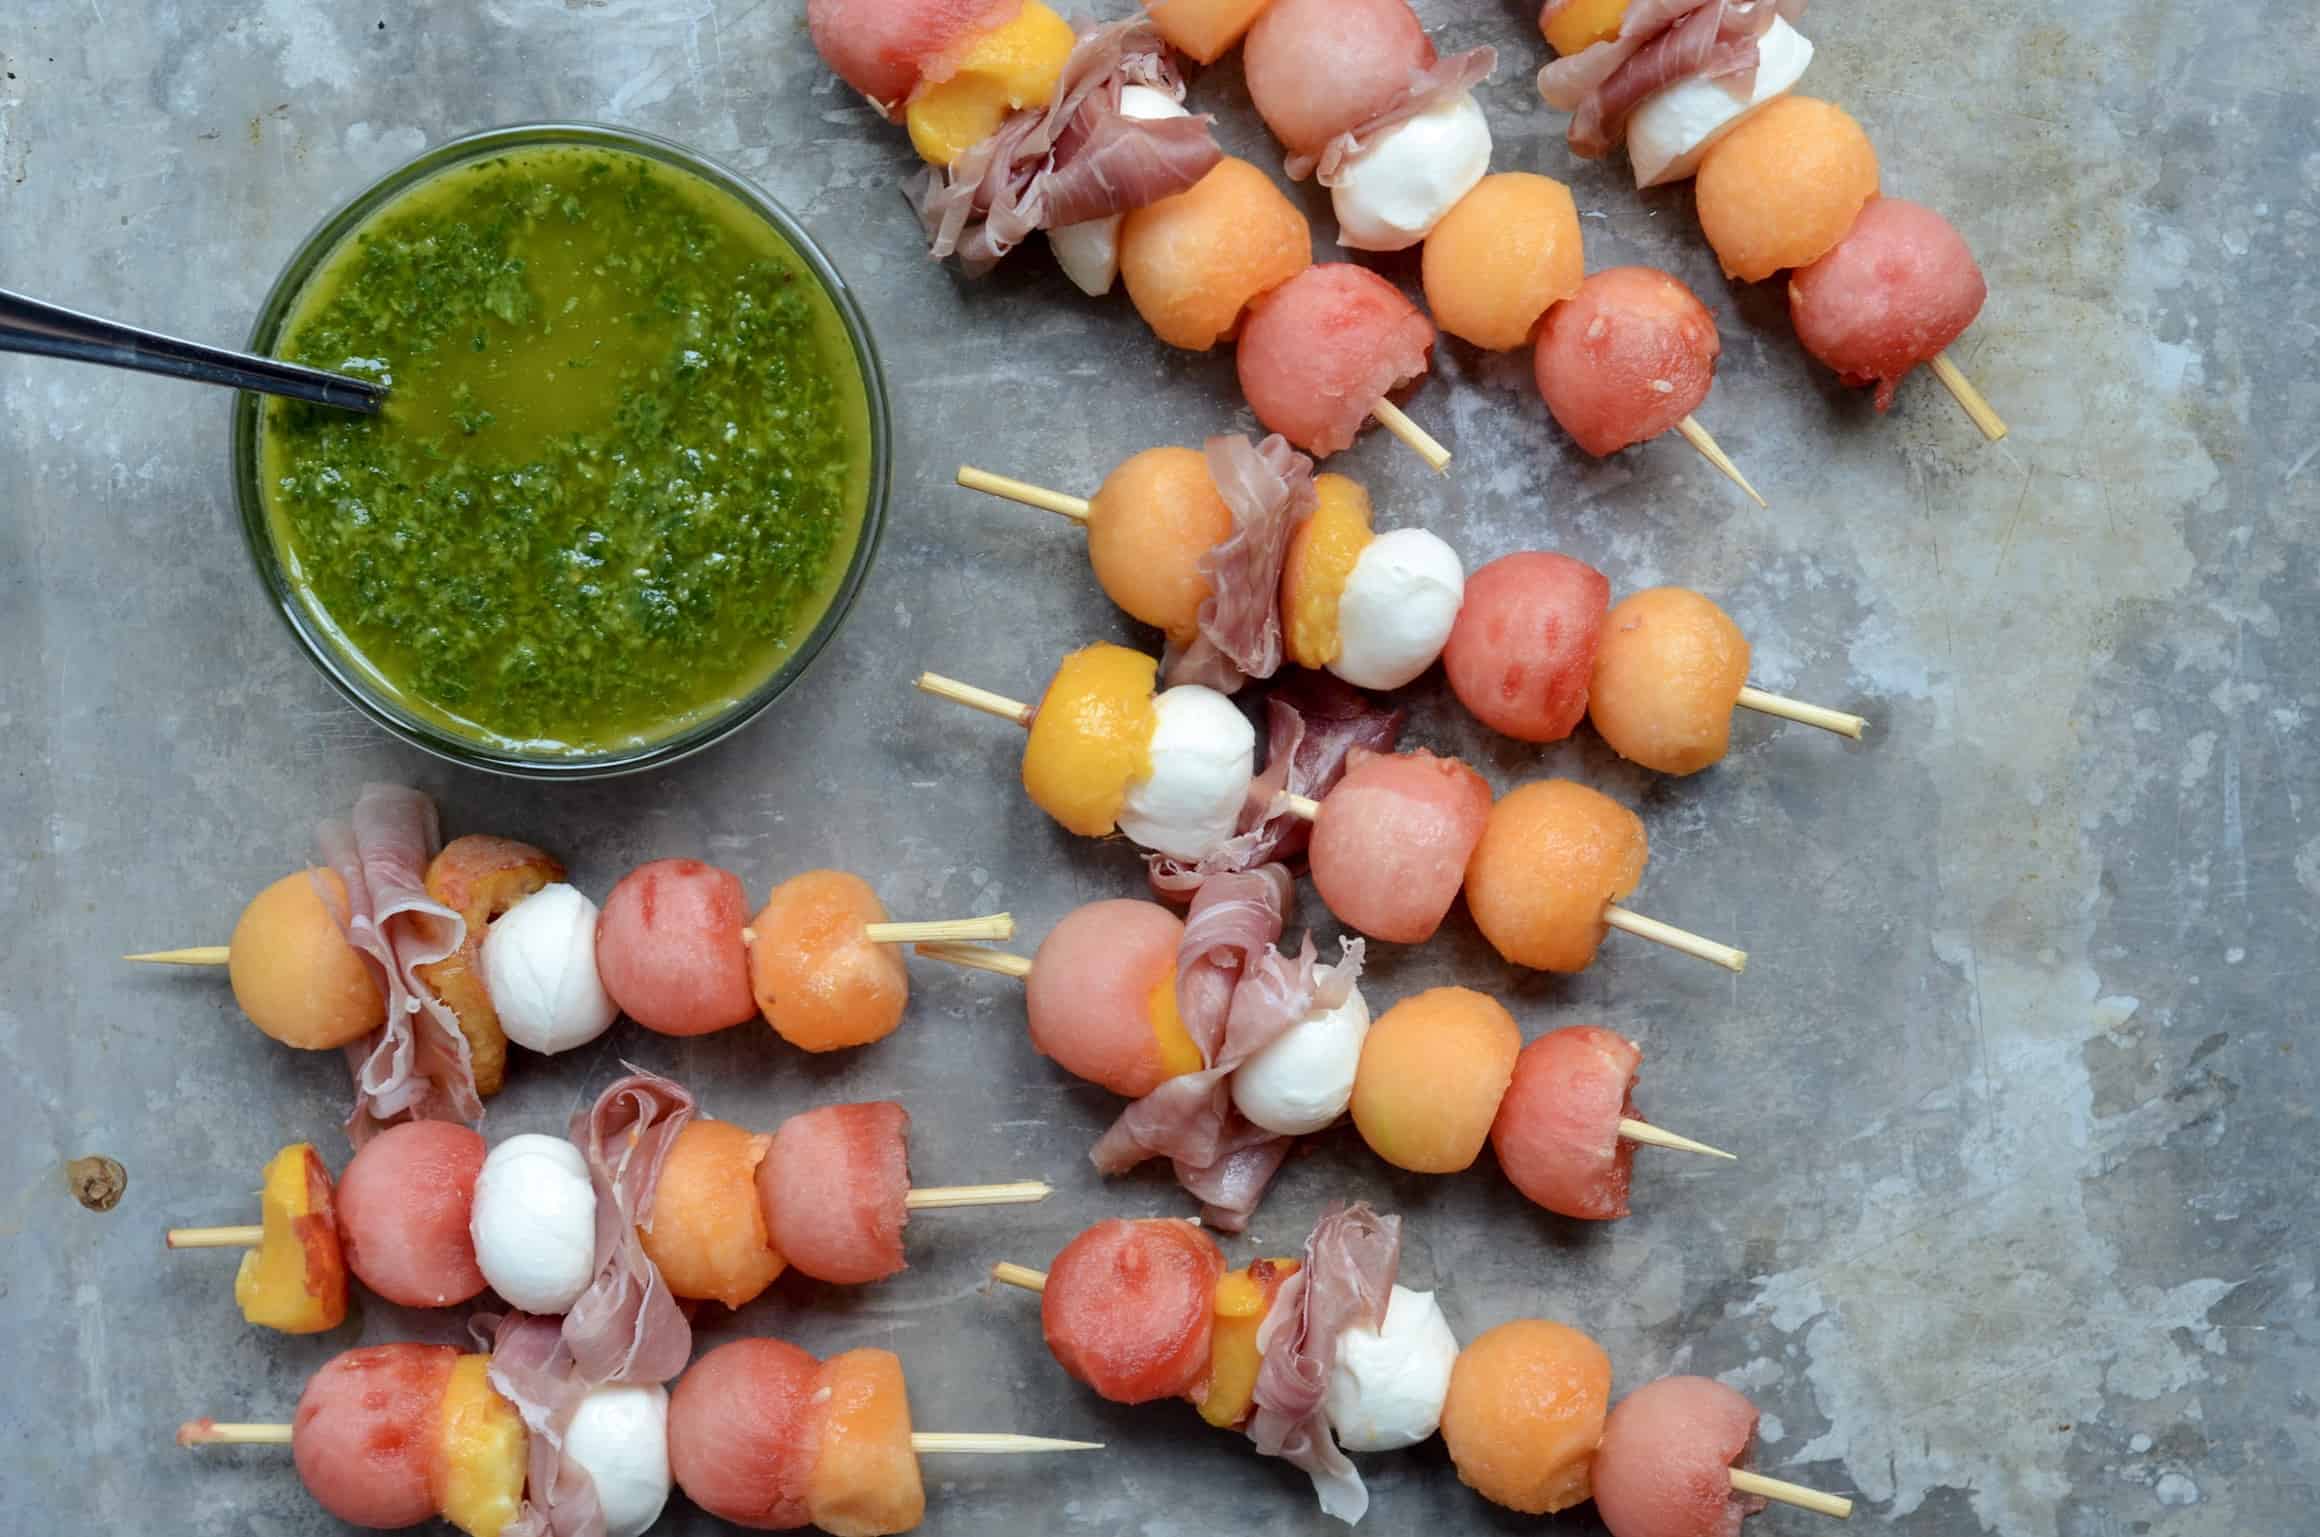 cantaloupe and watermelon skewers with basil vinaigrette